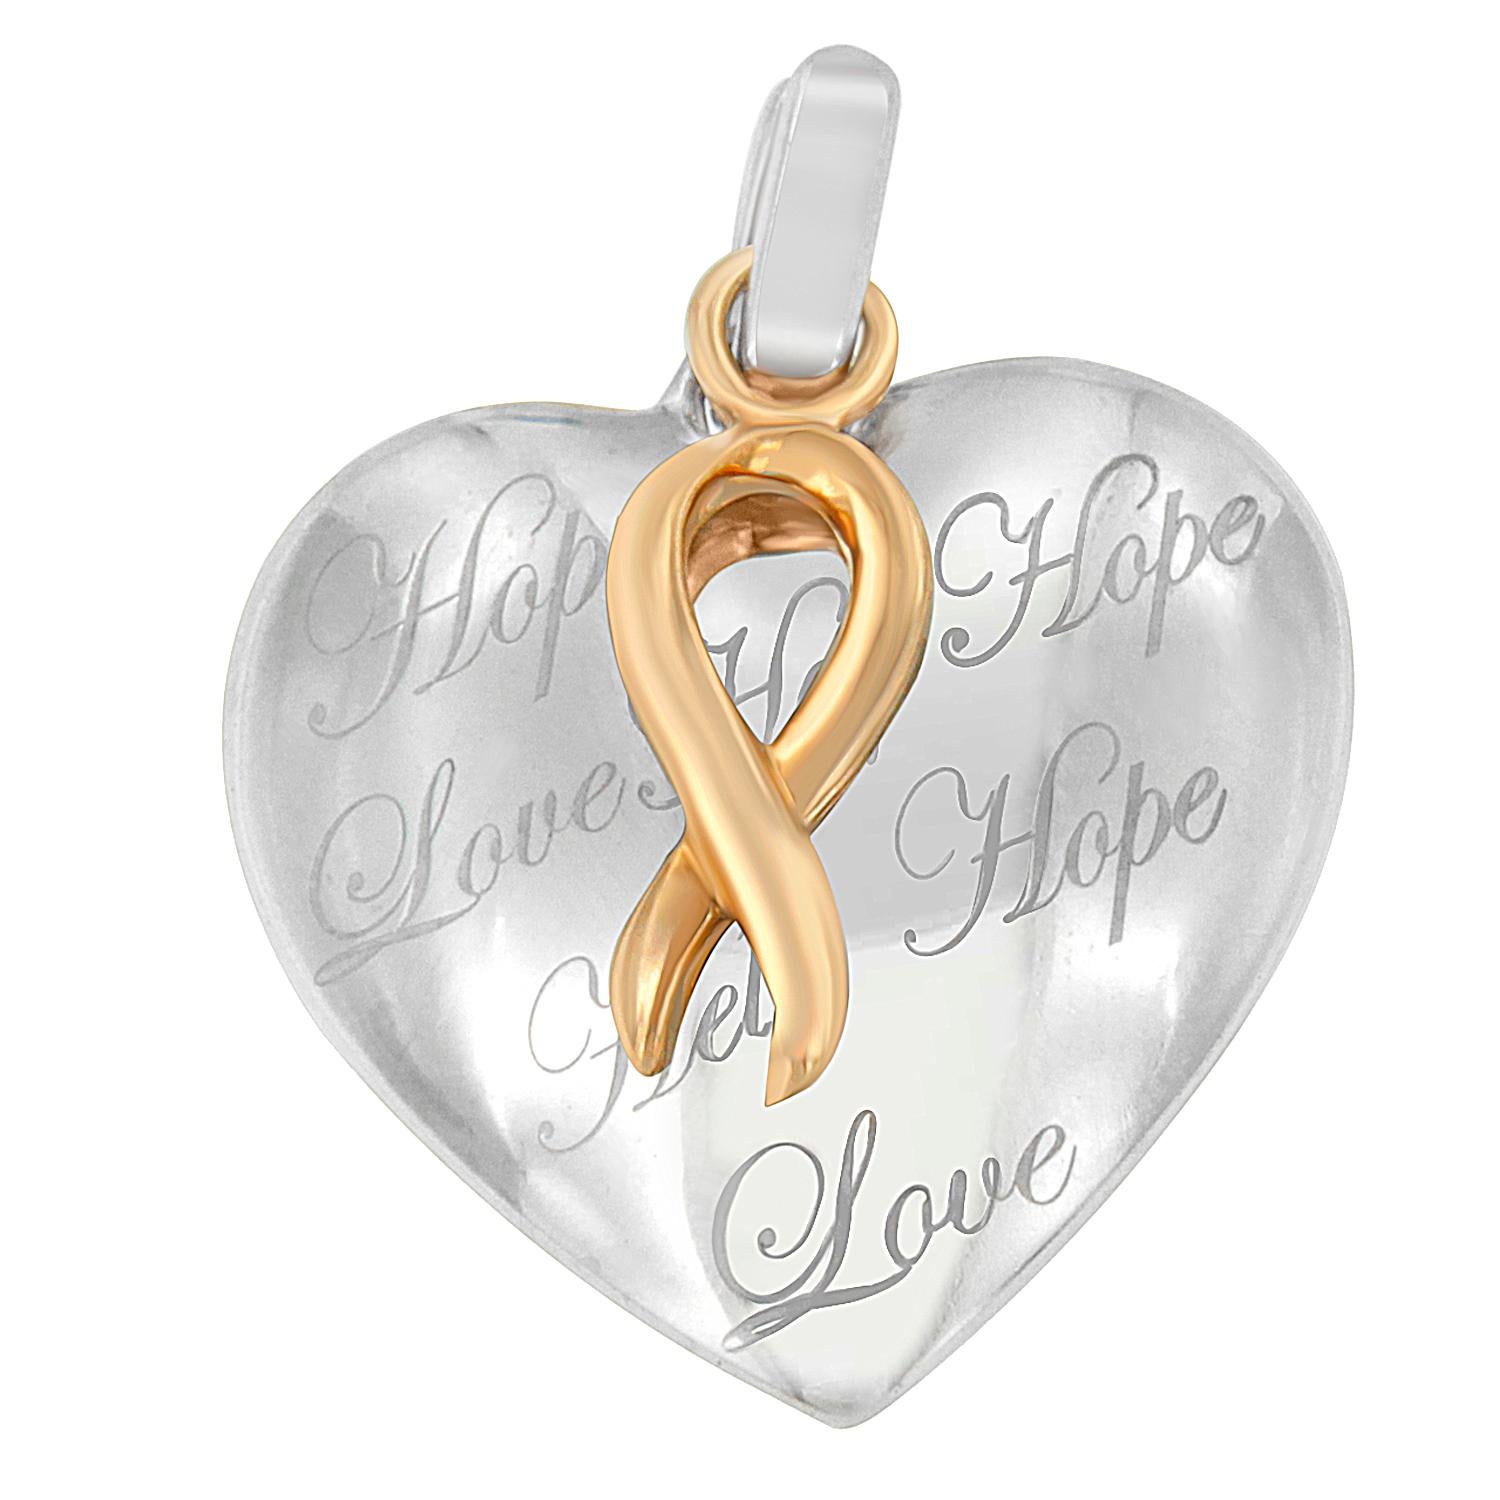 This gorgeous necklace makes a perfect present to show your love. Crafted from lustrous sterling silver, this heart-shaped pendant is engraved with Love and Hope gracefully. Further, it is layered with a rich ten karat yellow gold bow, which makes